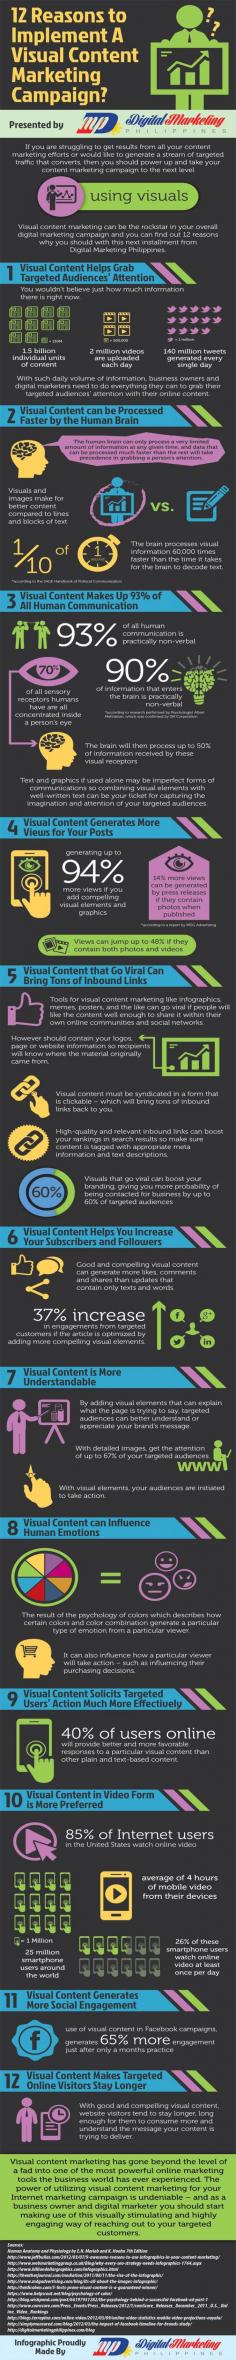 12 Reasons to Use Visual Content [Infographic] - SocialTimes